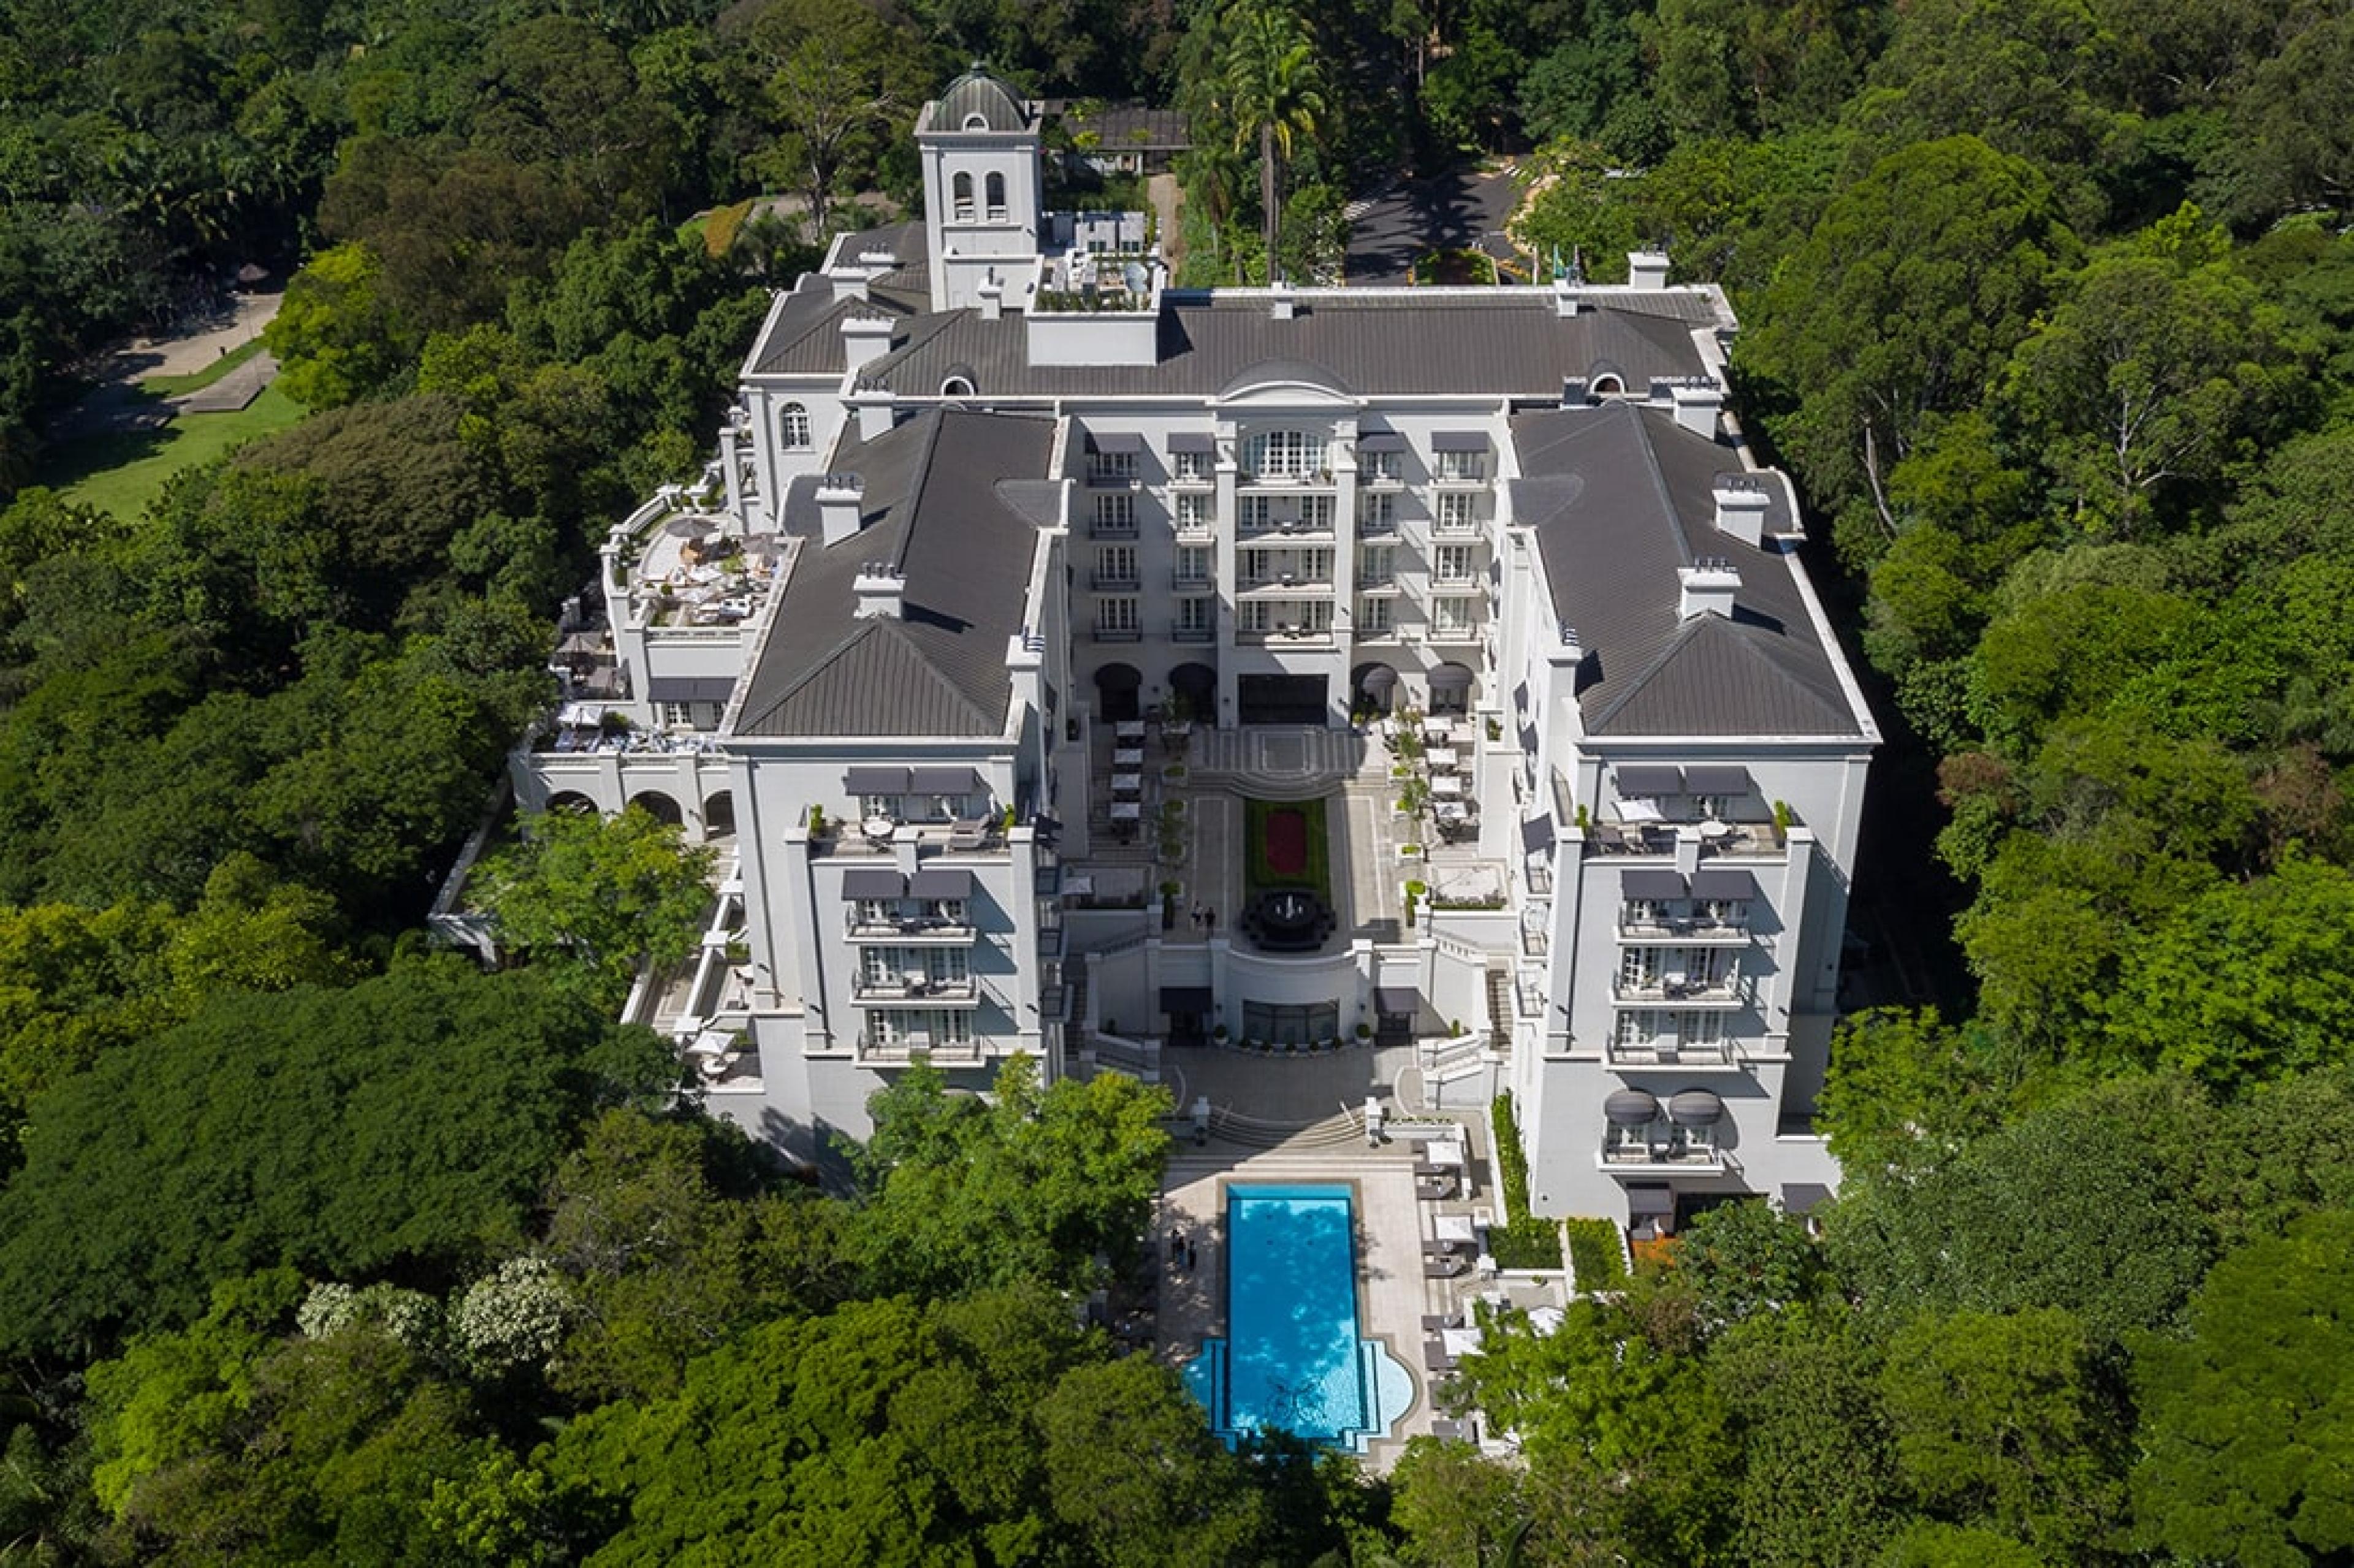 aerial view of U-shaped large hotel with pool in center courtyard and surrounded by dense trees